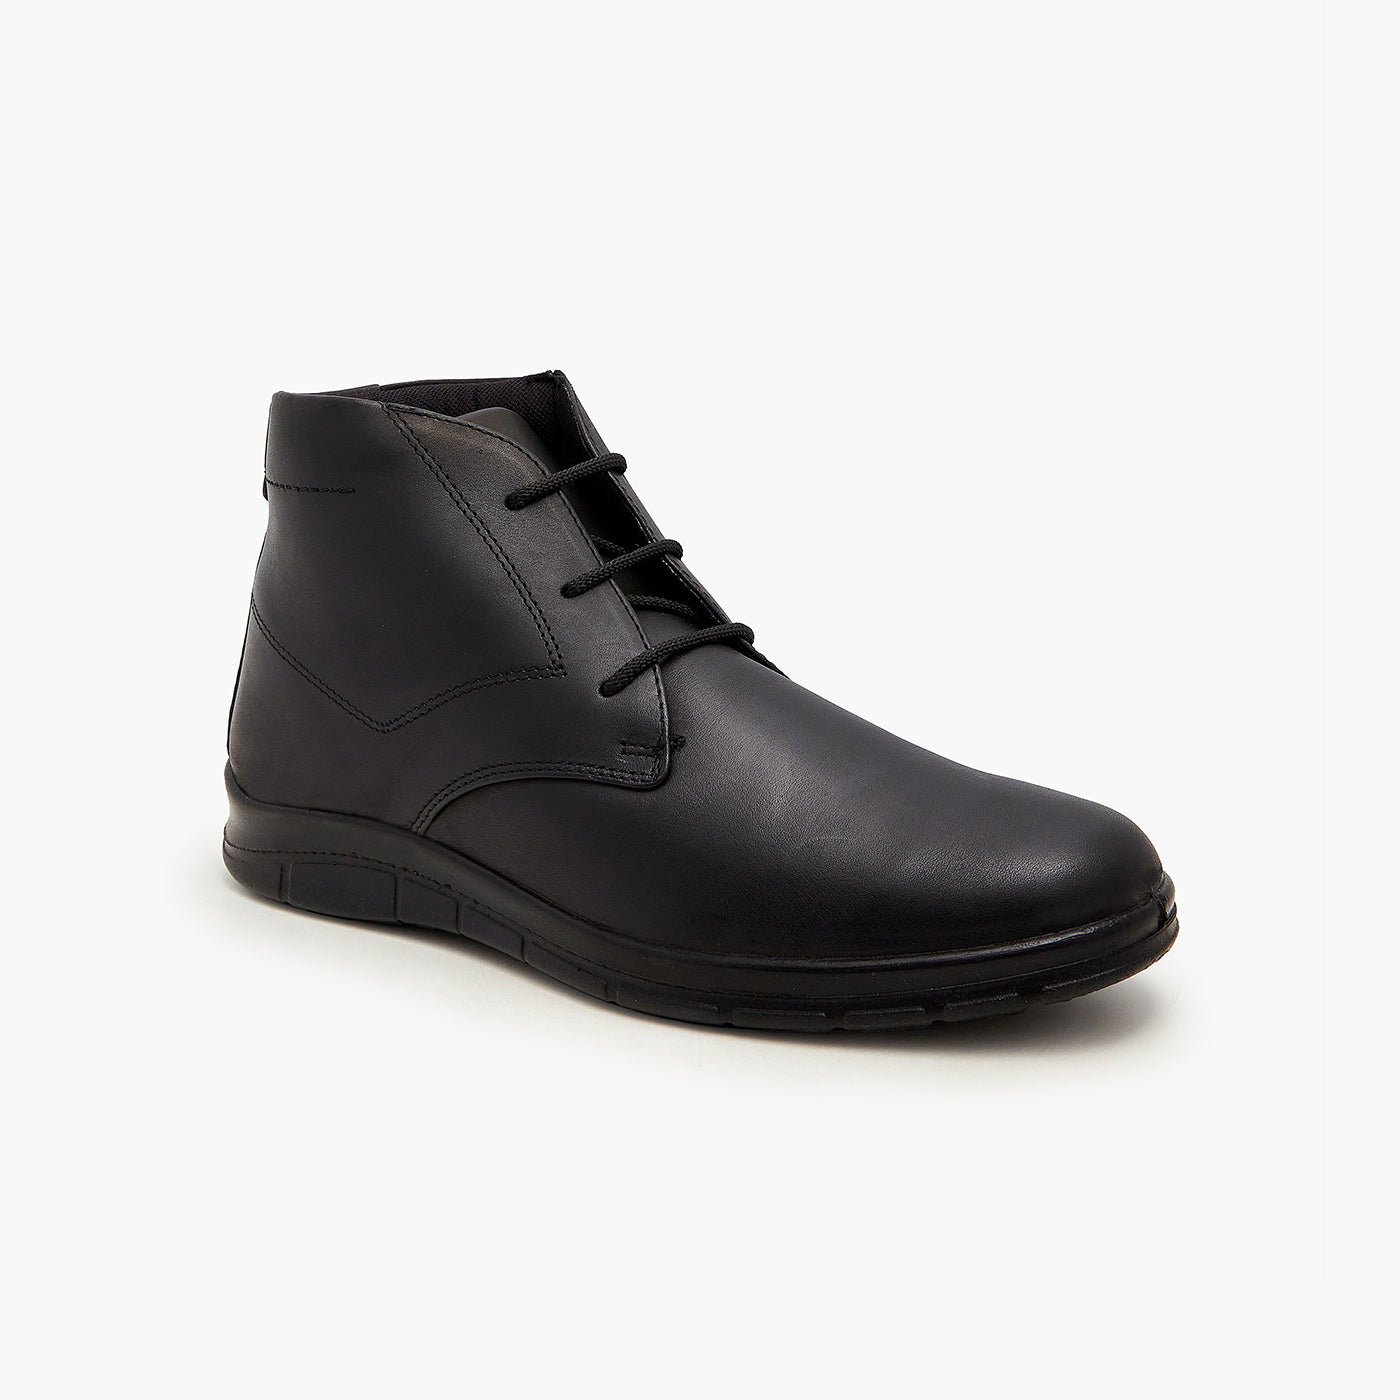 Comfortable Boots for Men